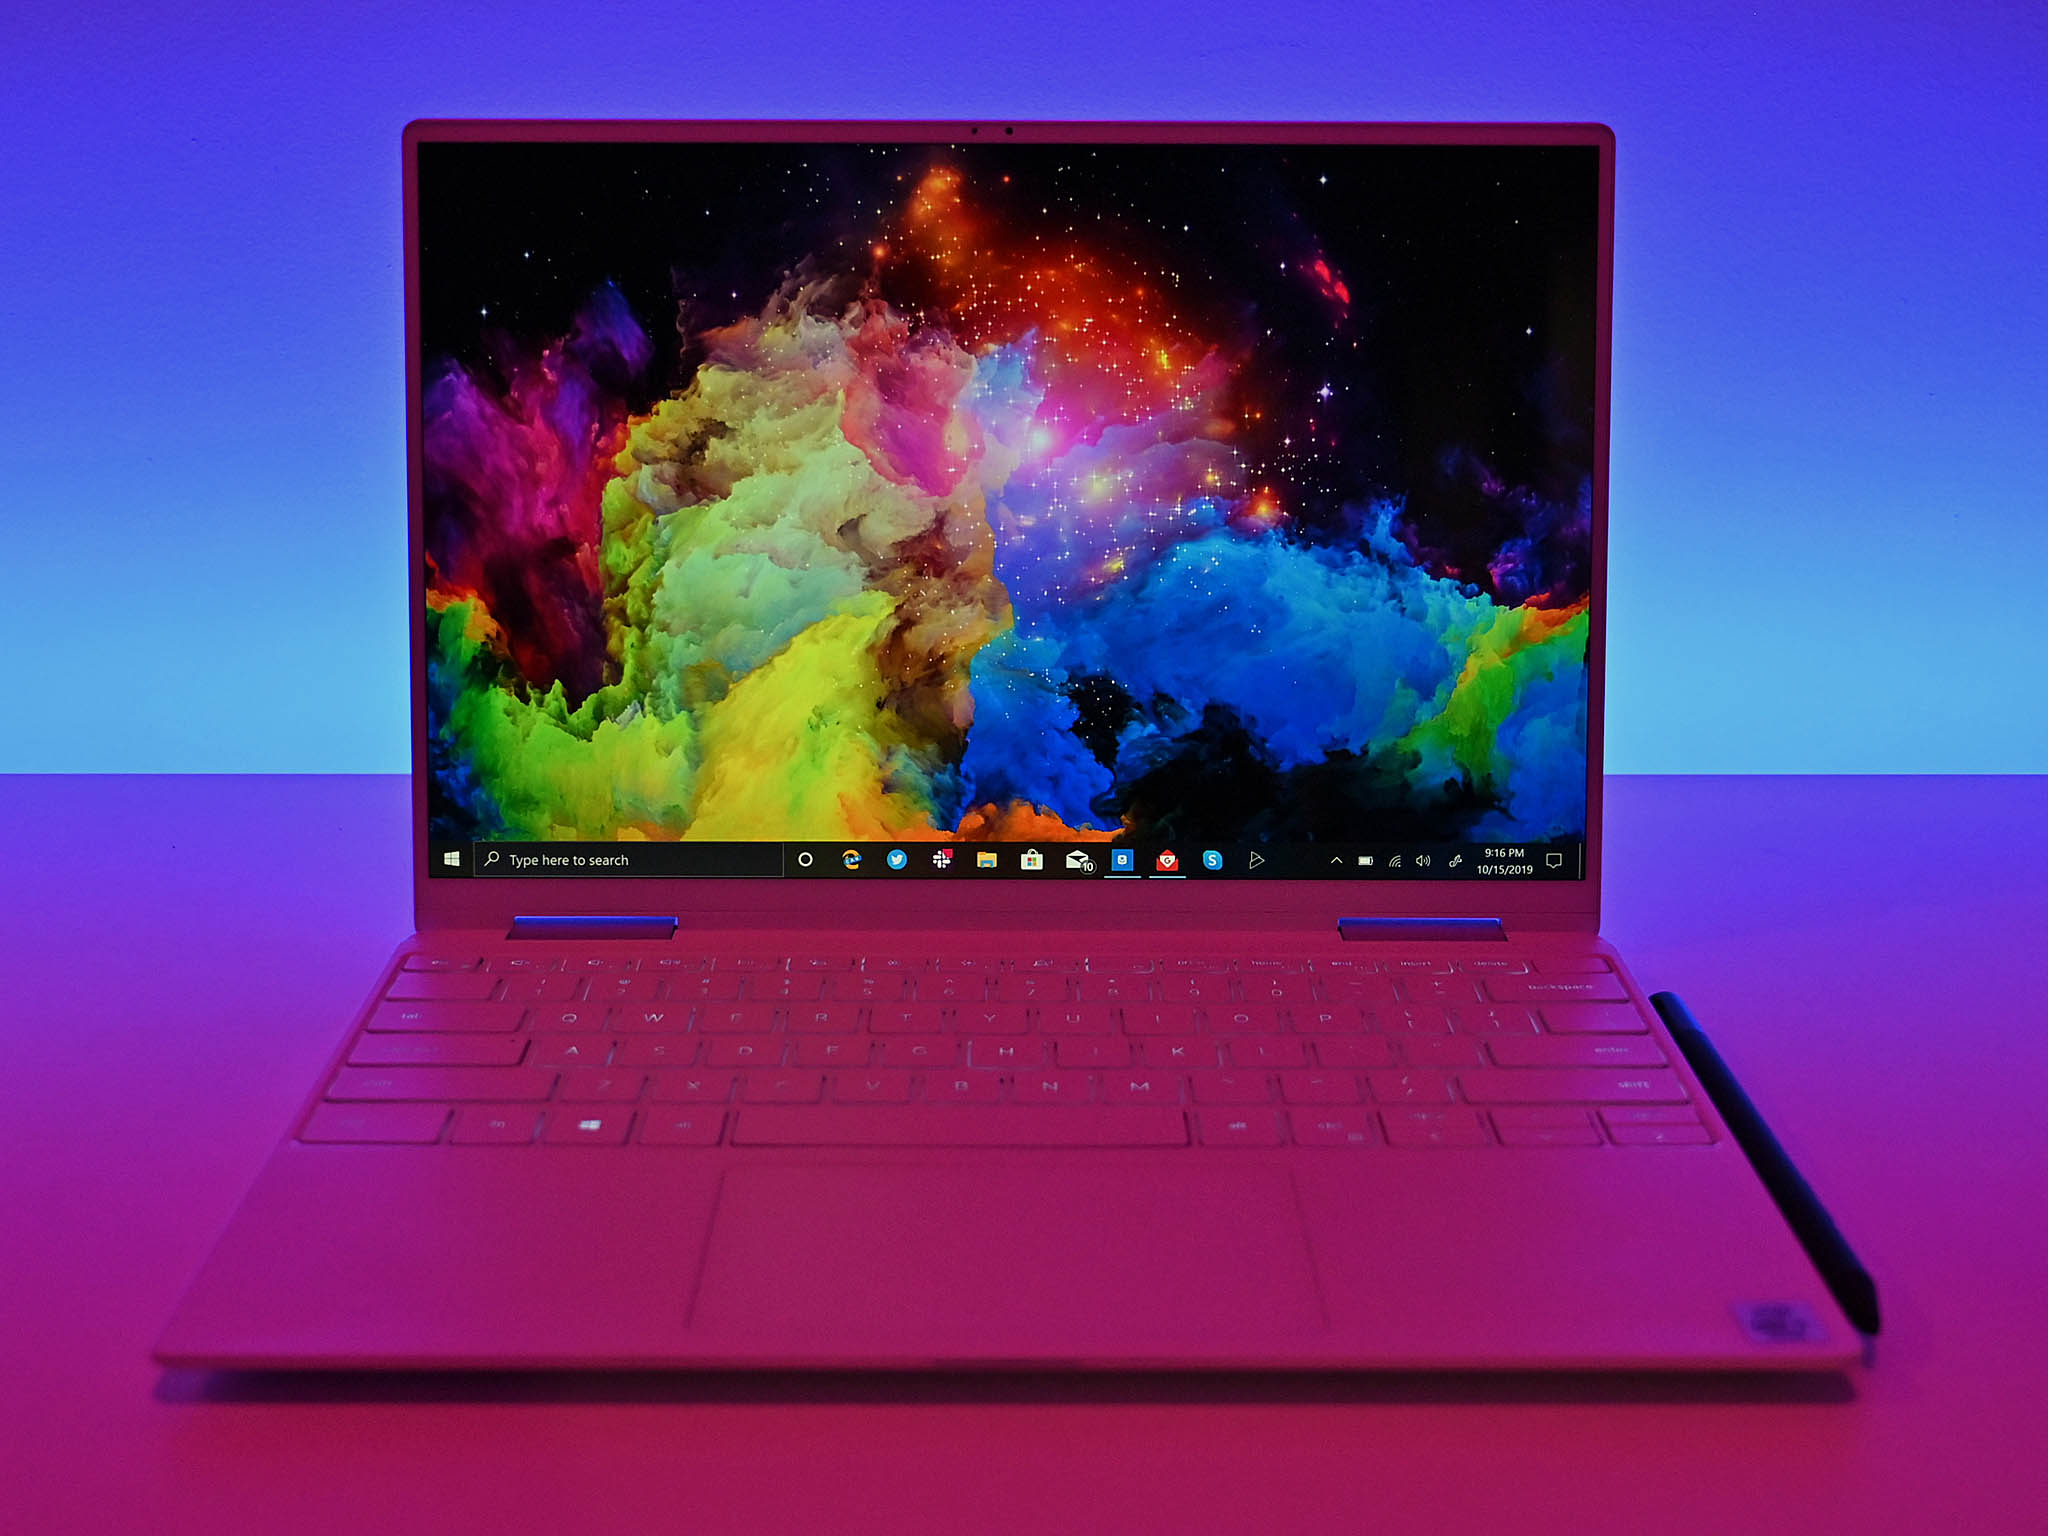 Dell Xps 13 2 In 1 Vs Dell Xps 15 Which Should You Buy Windows Central